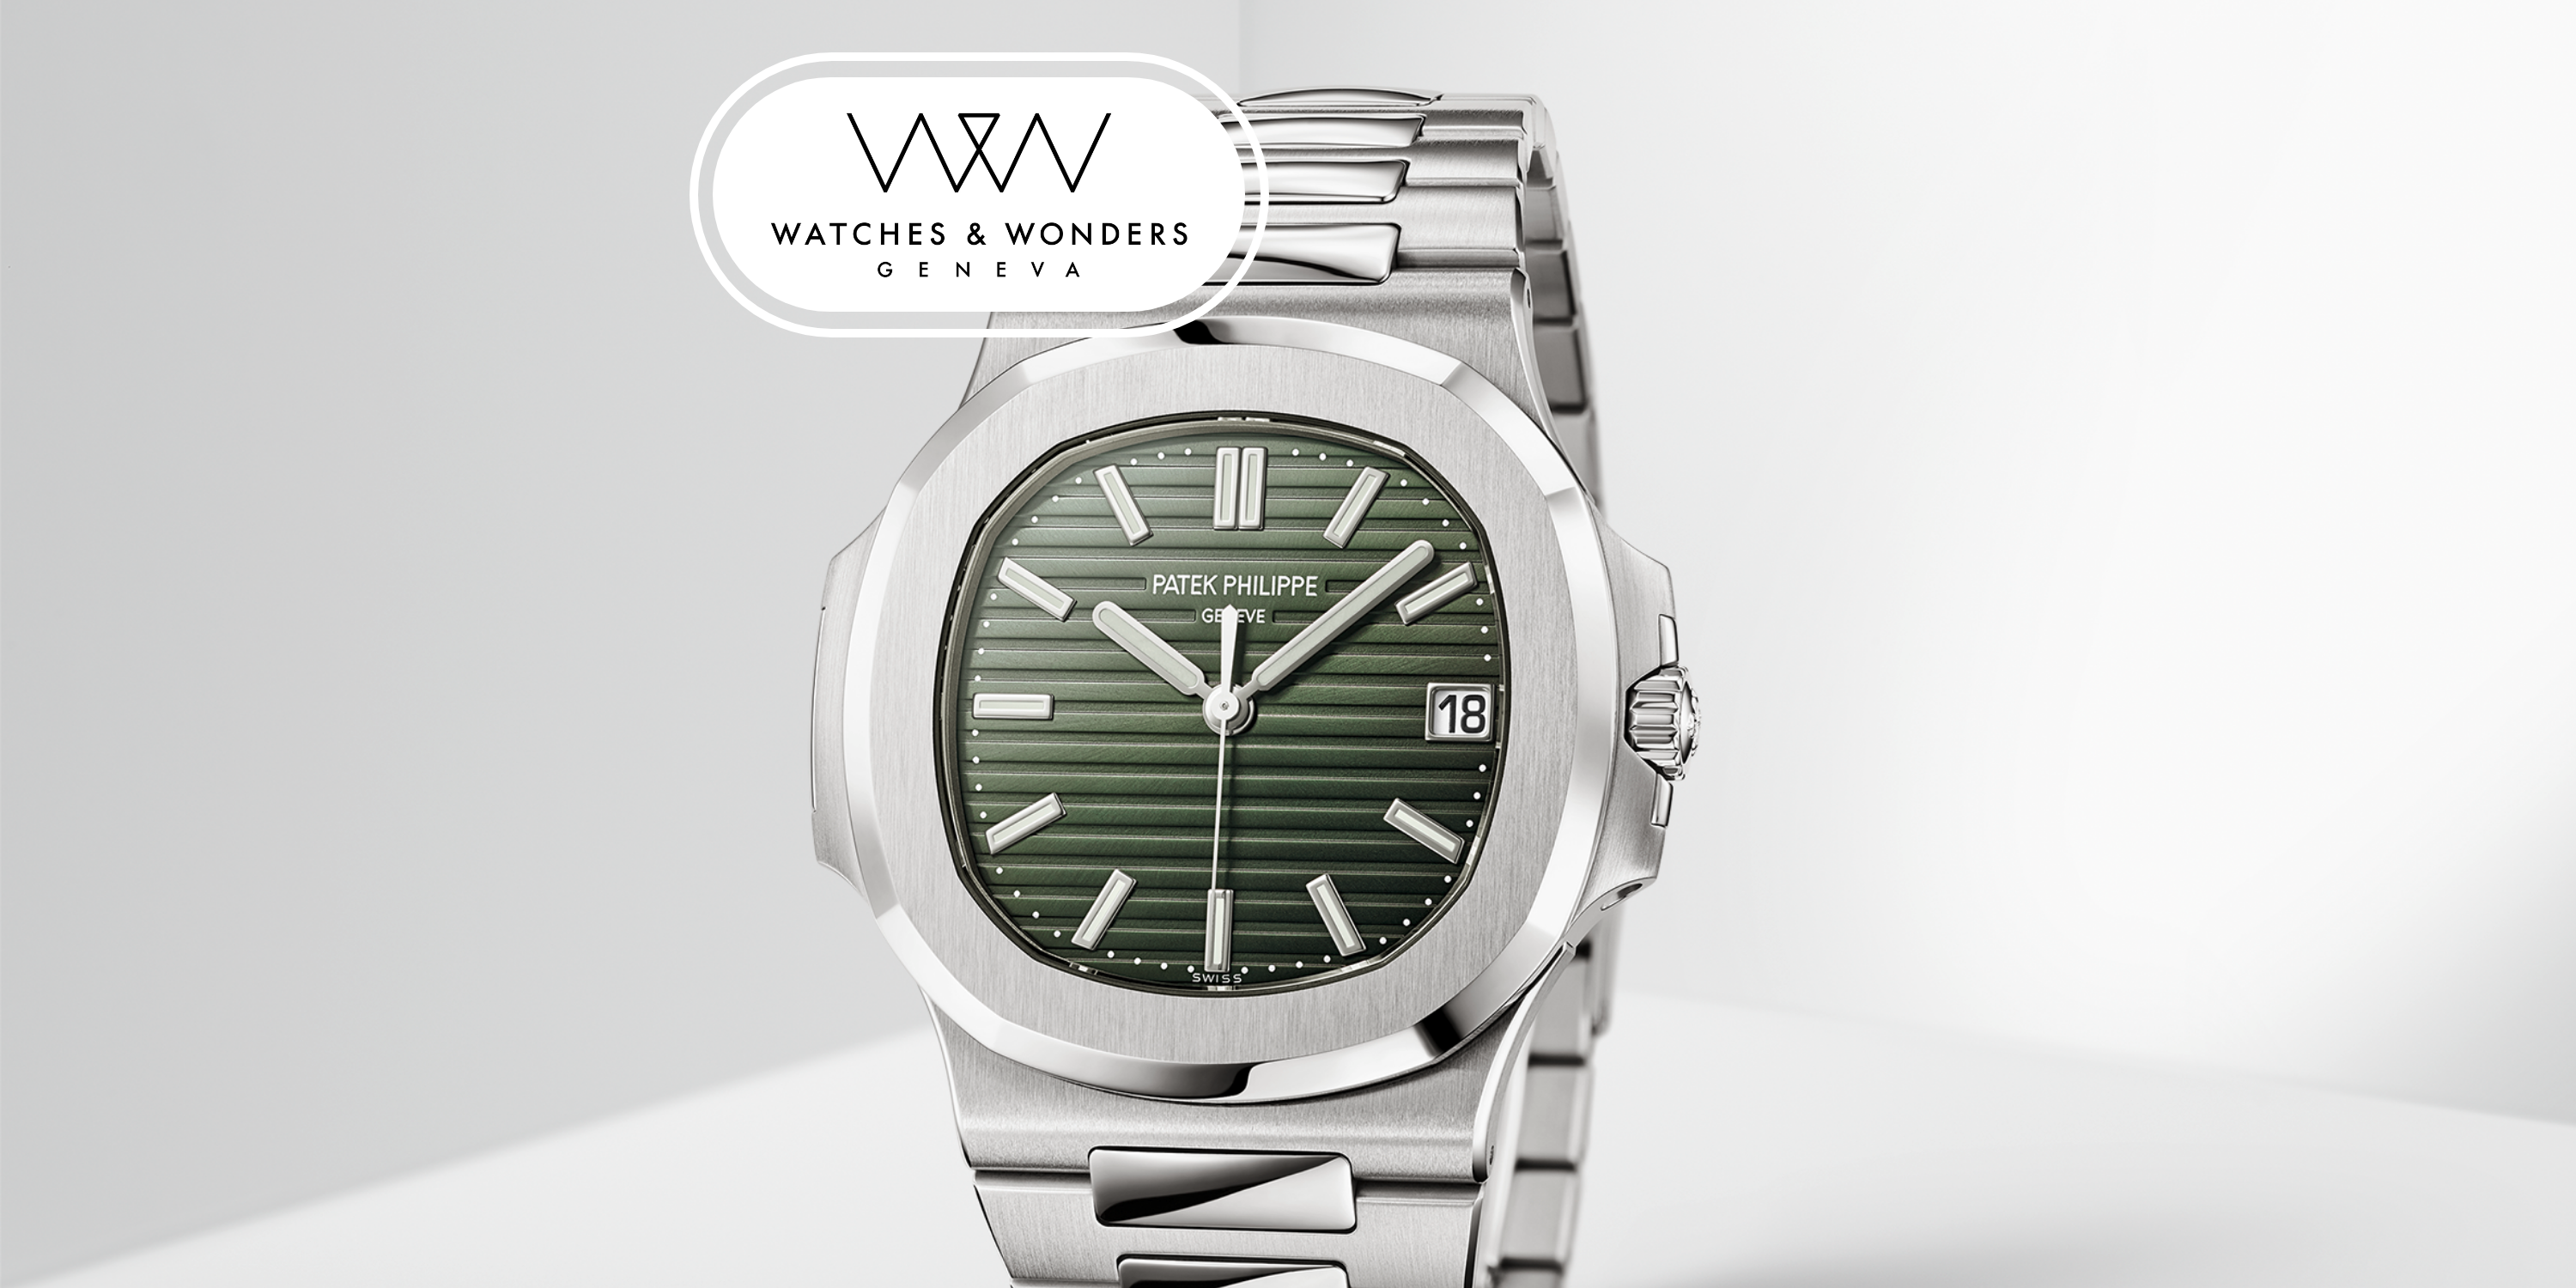 RECOMMENDED READING: Patek Philippe Nautilus 5711 discontinued